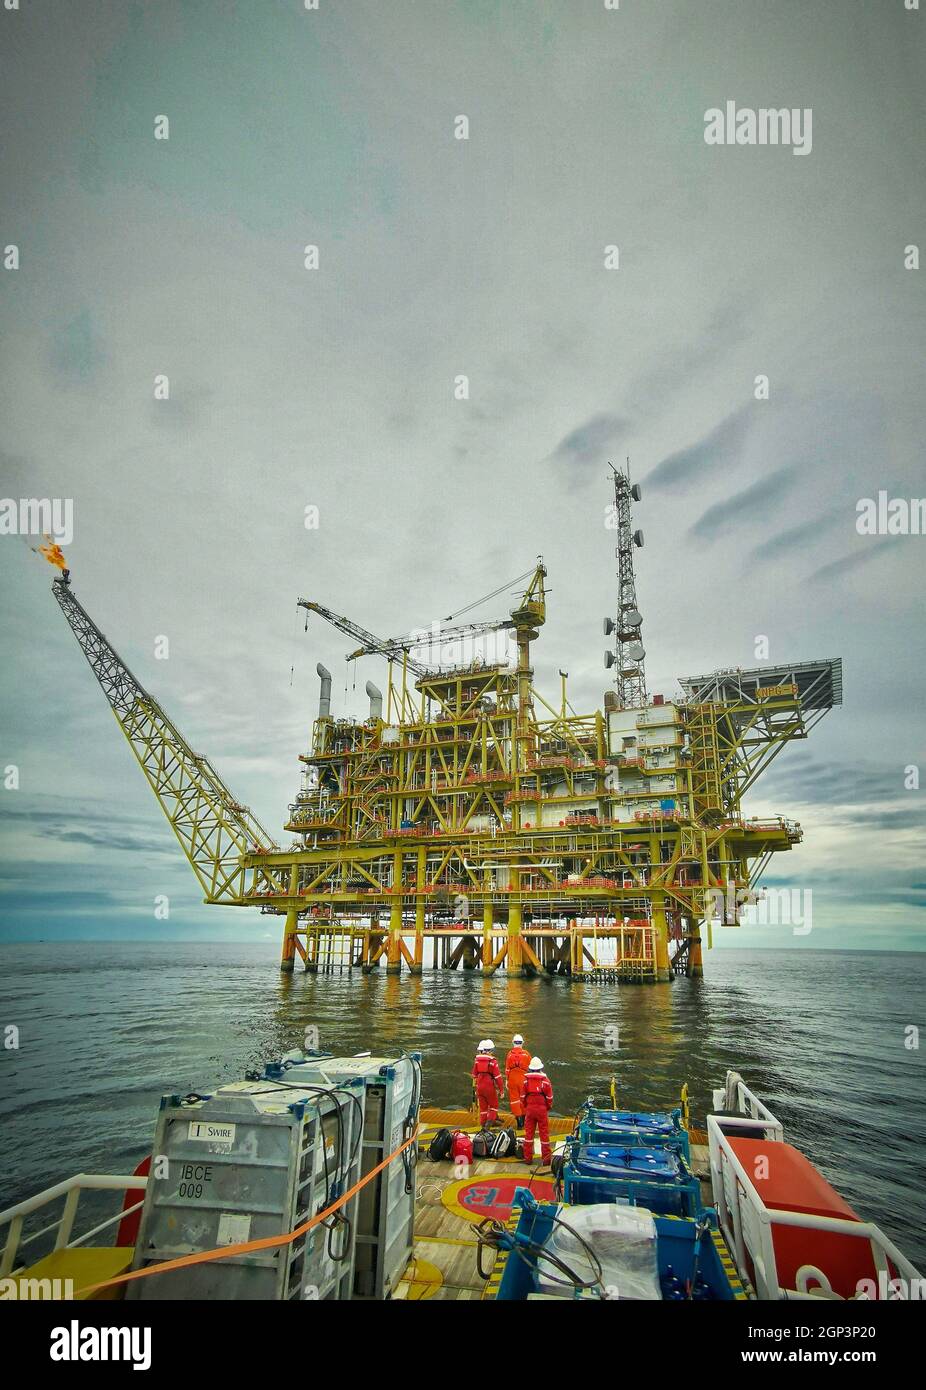 marine crew get ready to transfer oil platform personal to oil platform when weather in good condition Stock Photo